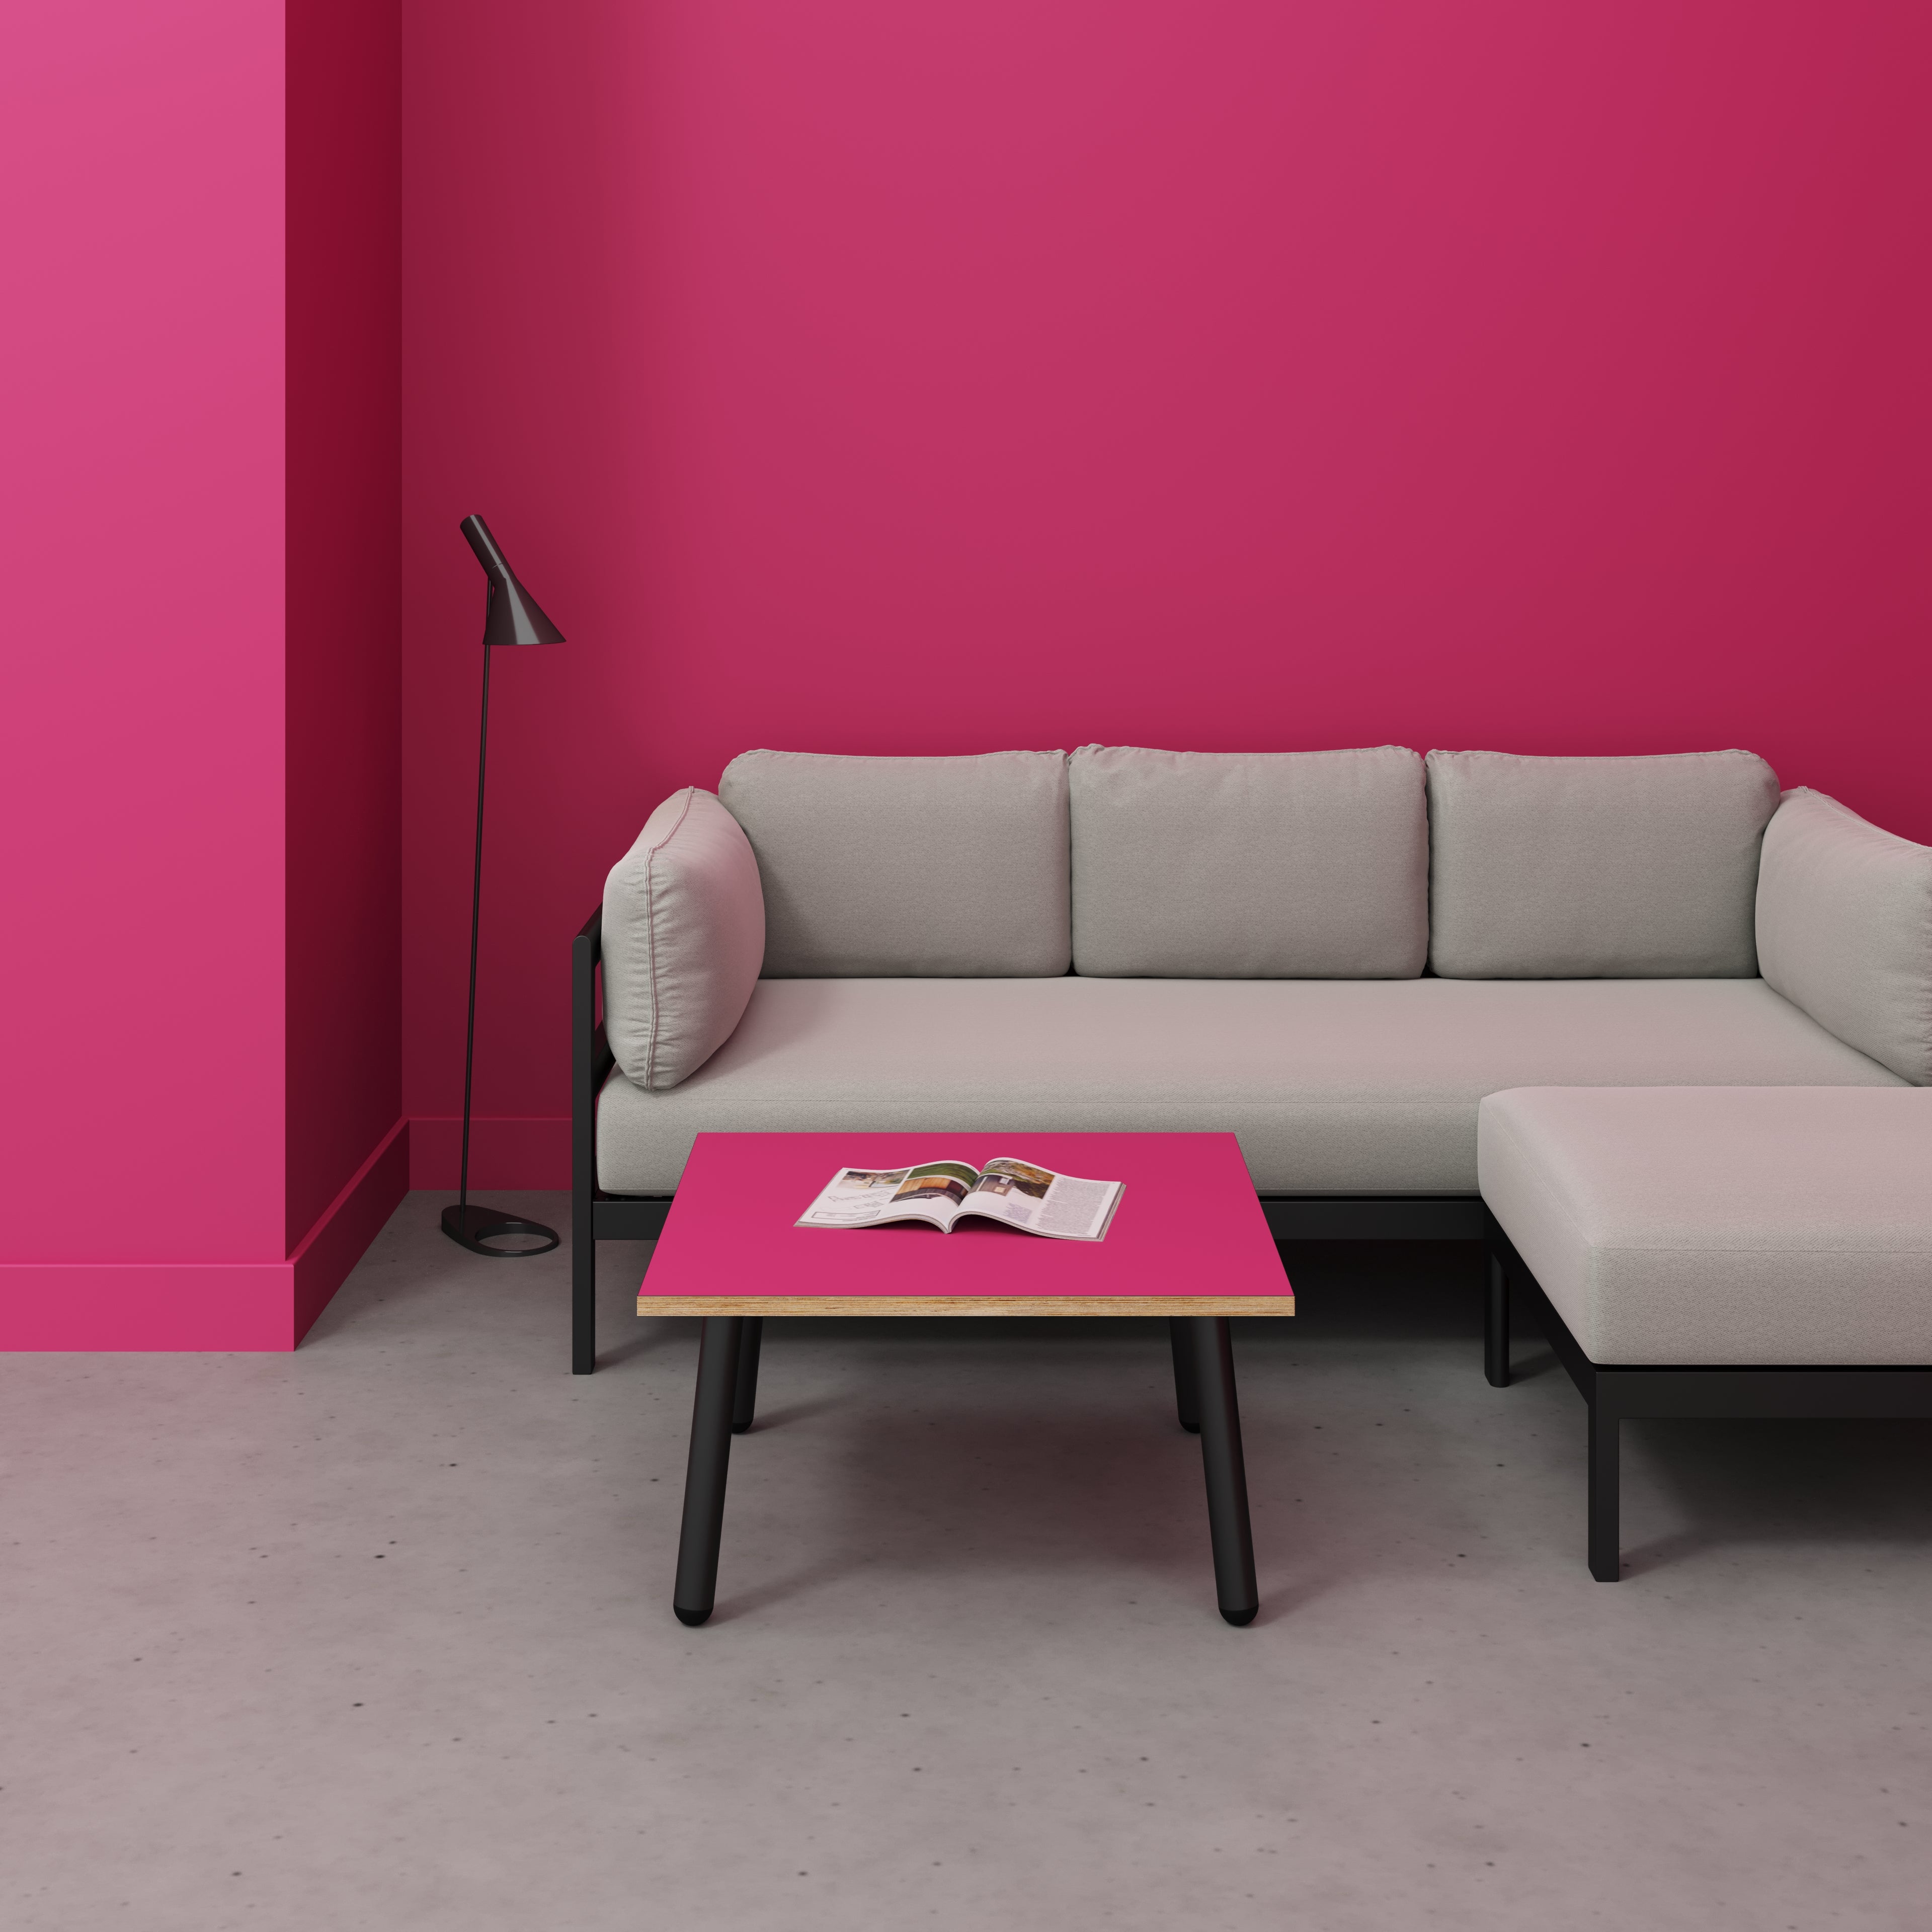 Coffee Table with Black Round Single Pin Legs - Formica Juicy Pink - 800(w) x 800(d) x 425(h)